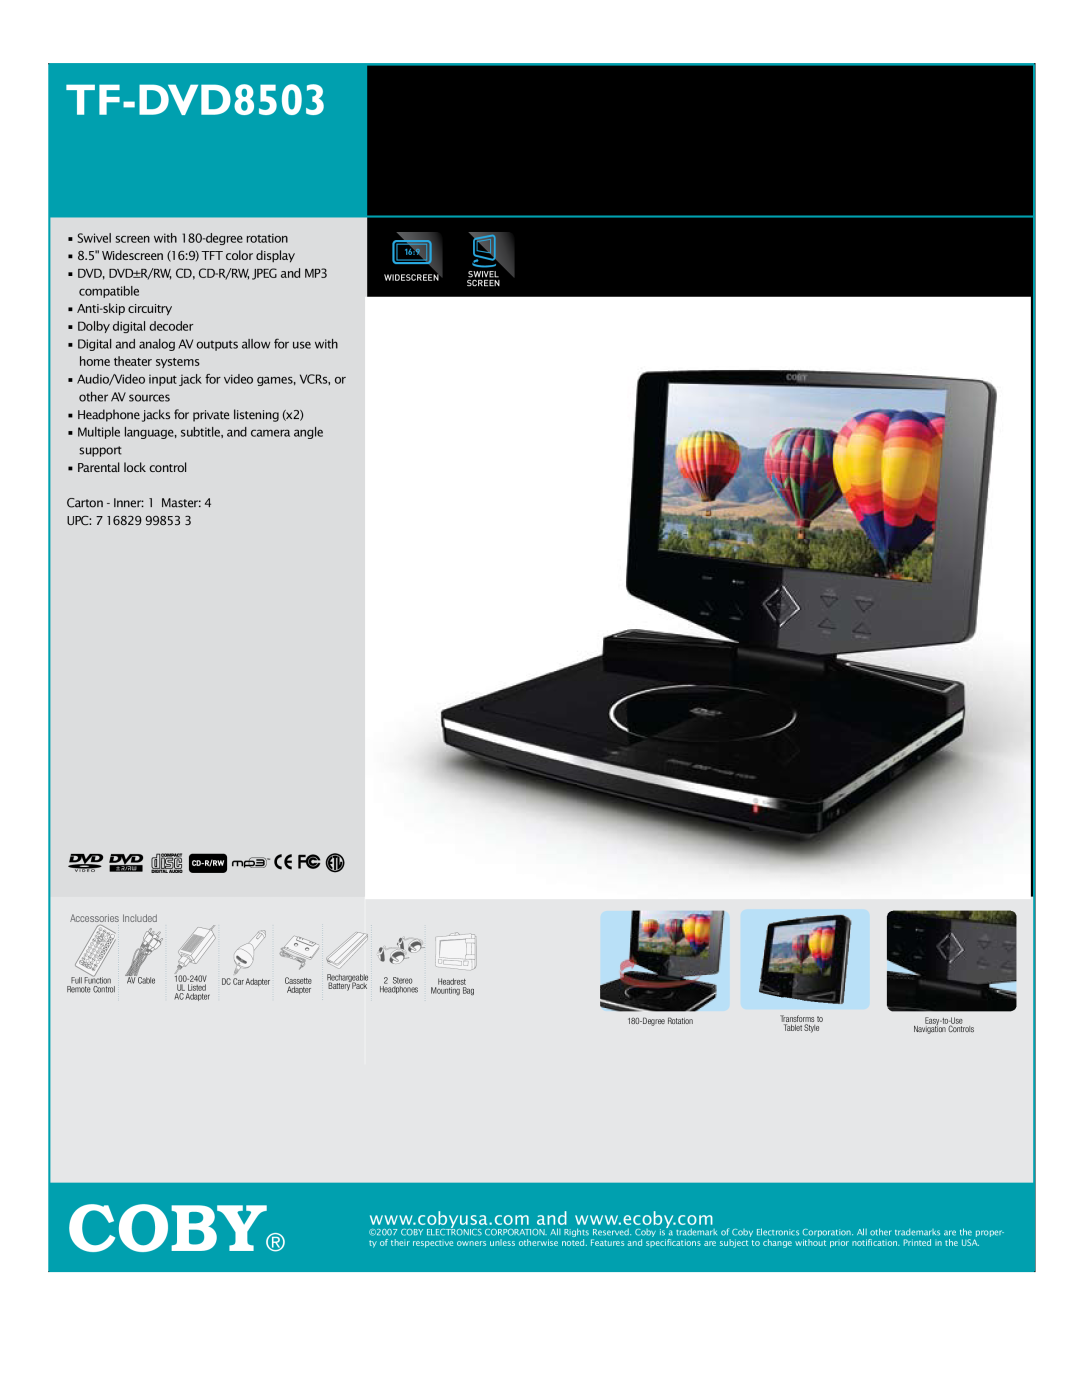 COBY electronic specifications Coby, TF-DVD8503 8.5 WIDESCREEN TFT PORTABLE DVD/CD/MP3 PLAYER with SWIVEL, Screen 